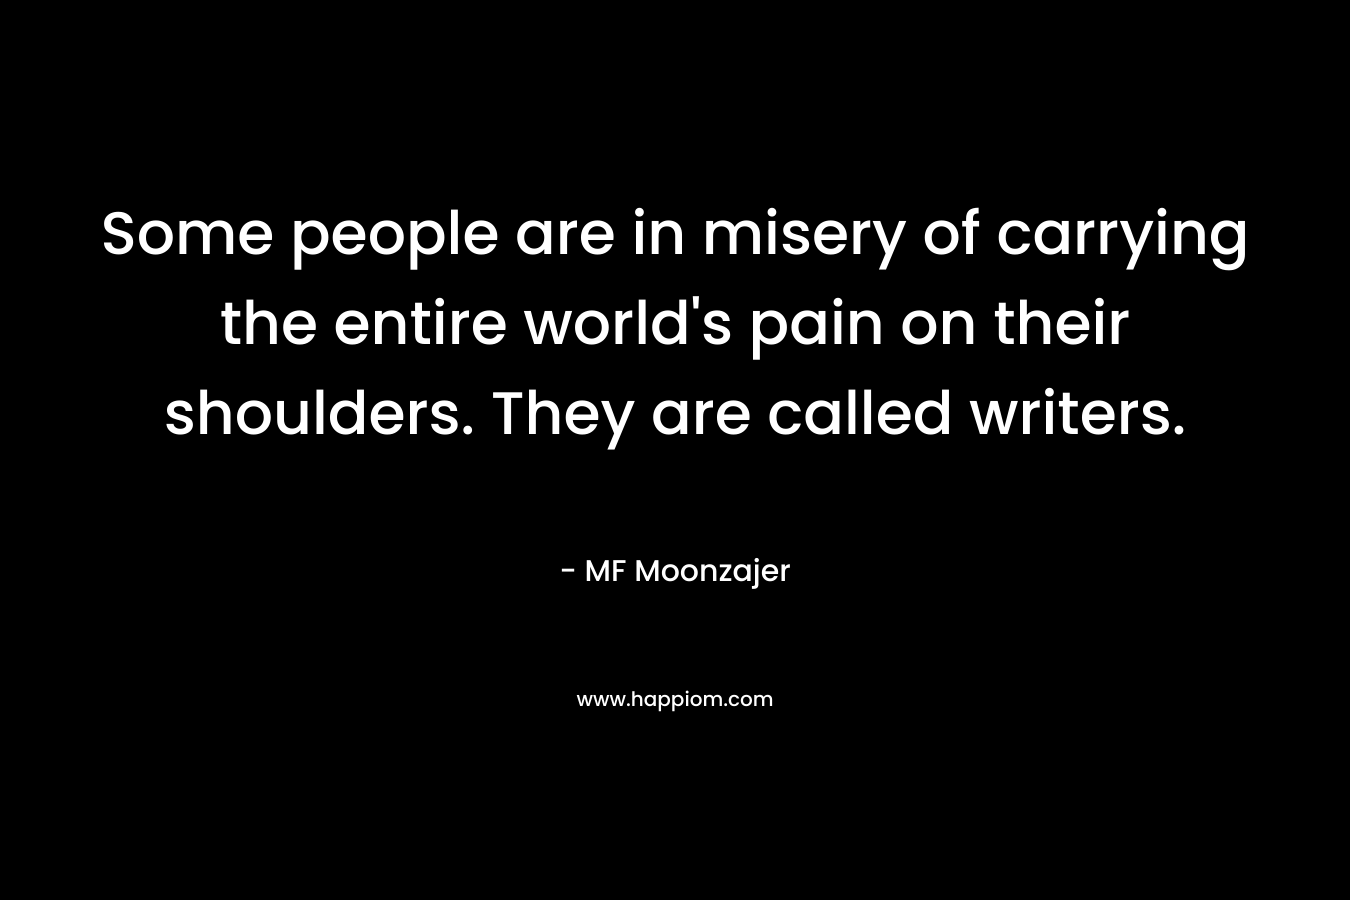 Some people are in misery of carrying the entire world's pain on their shoulders. They are called writers.